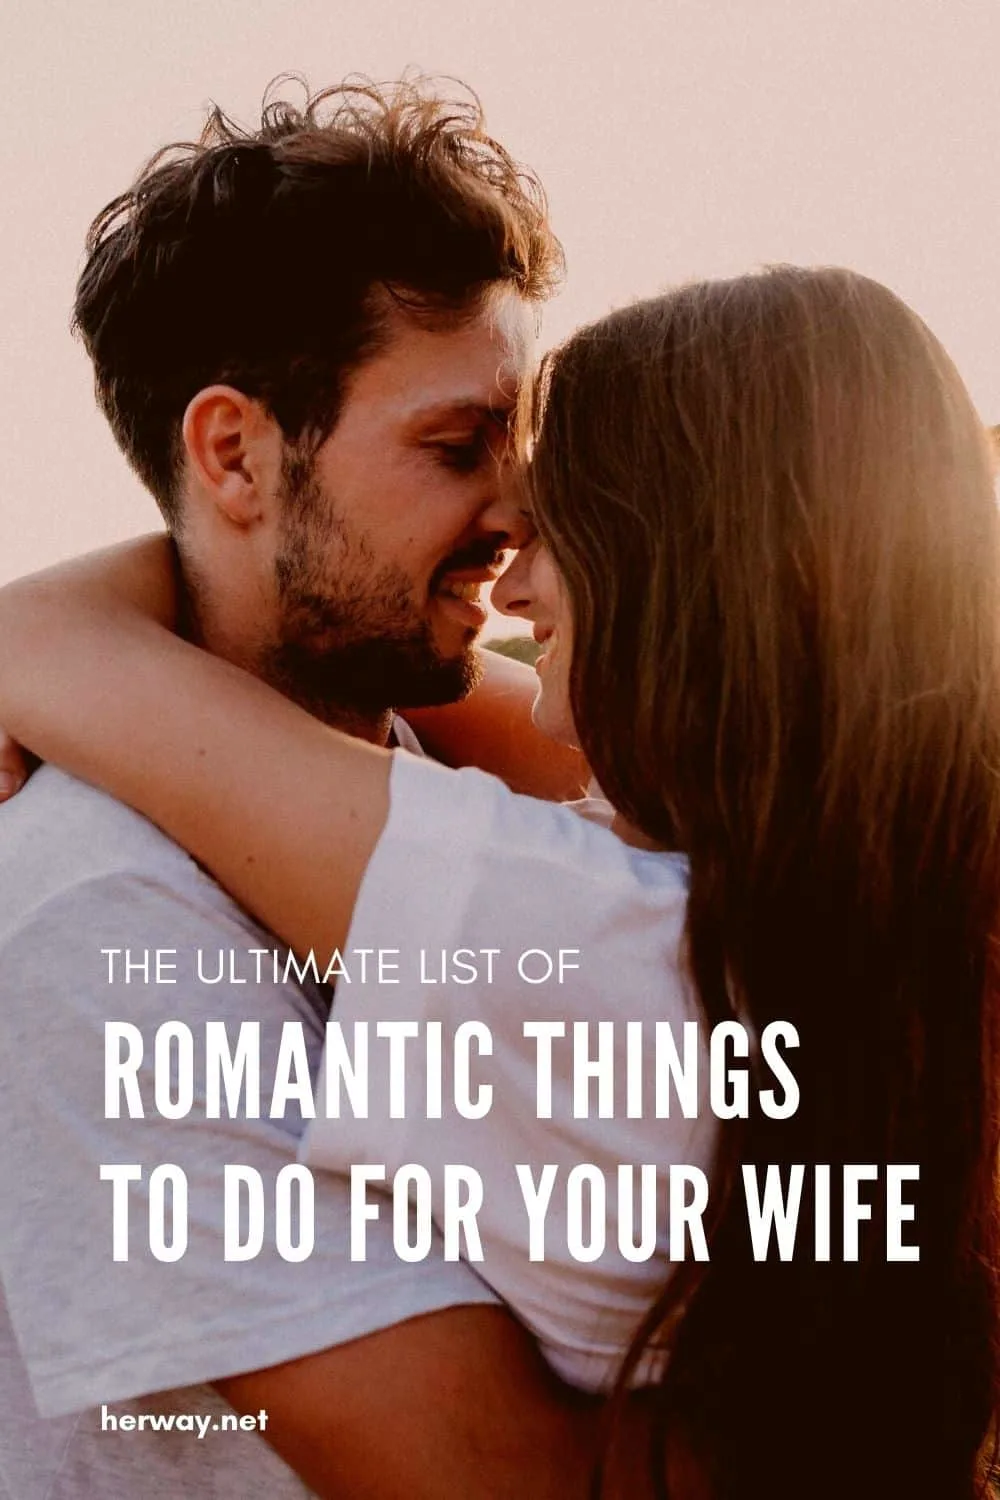 The Ultimate List Of Romantic Things To Do For Your Wife